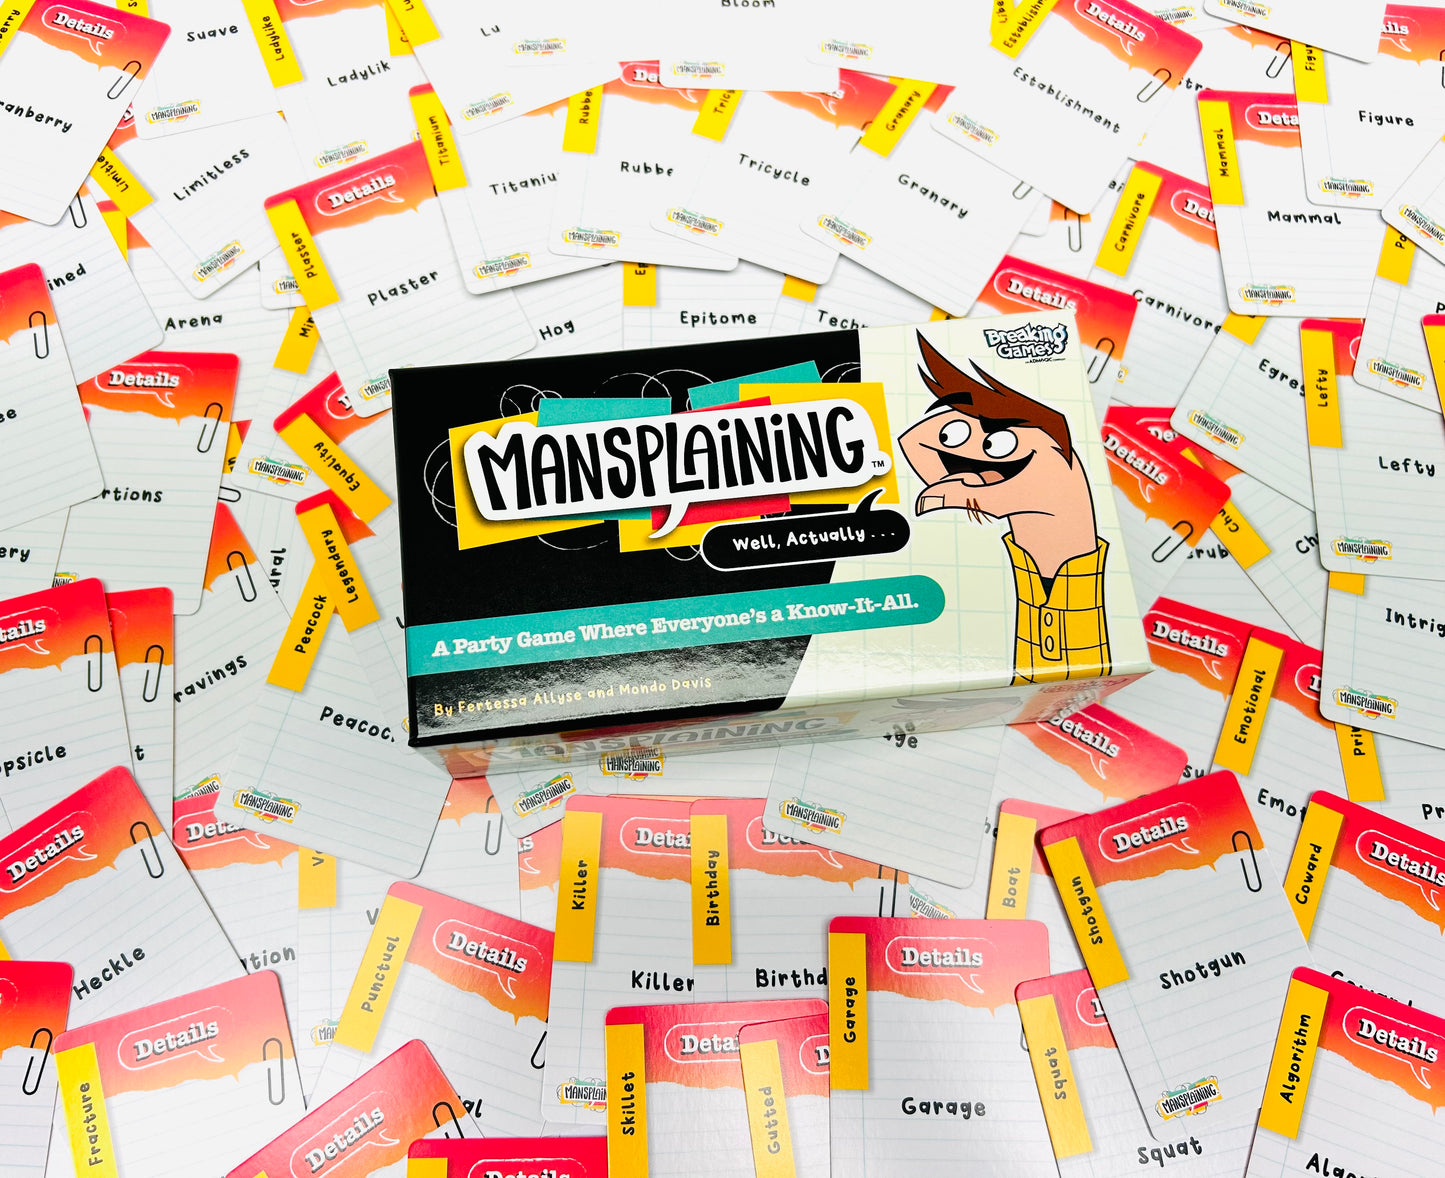 Mansplaining | Family Party Card Game | 2+ Players Game Breaking Games